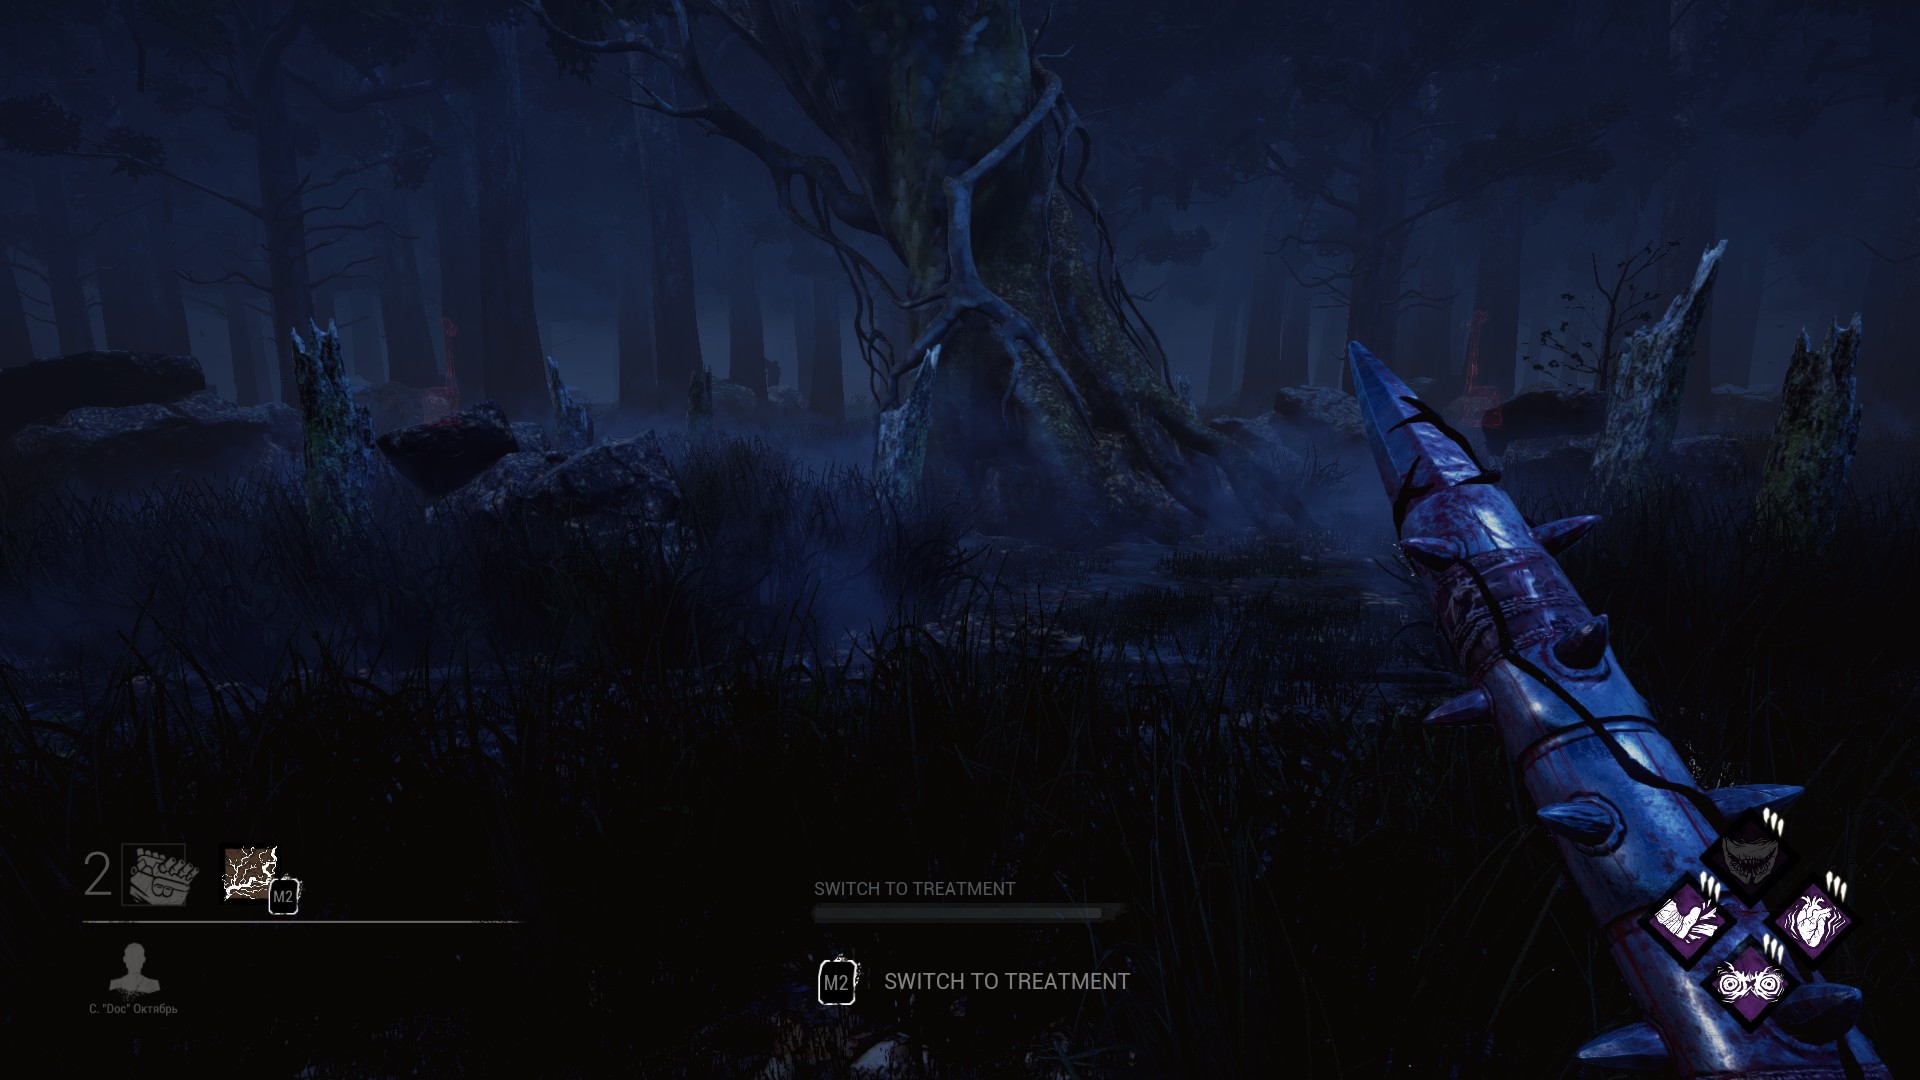 does the dark moonlight affect killers dbd